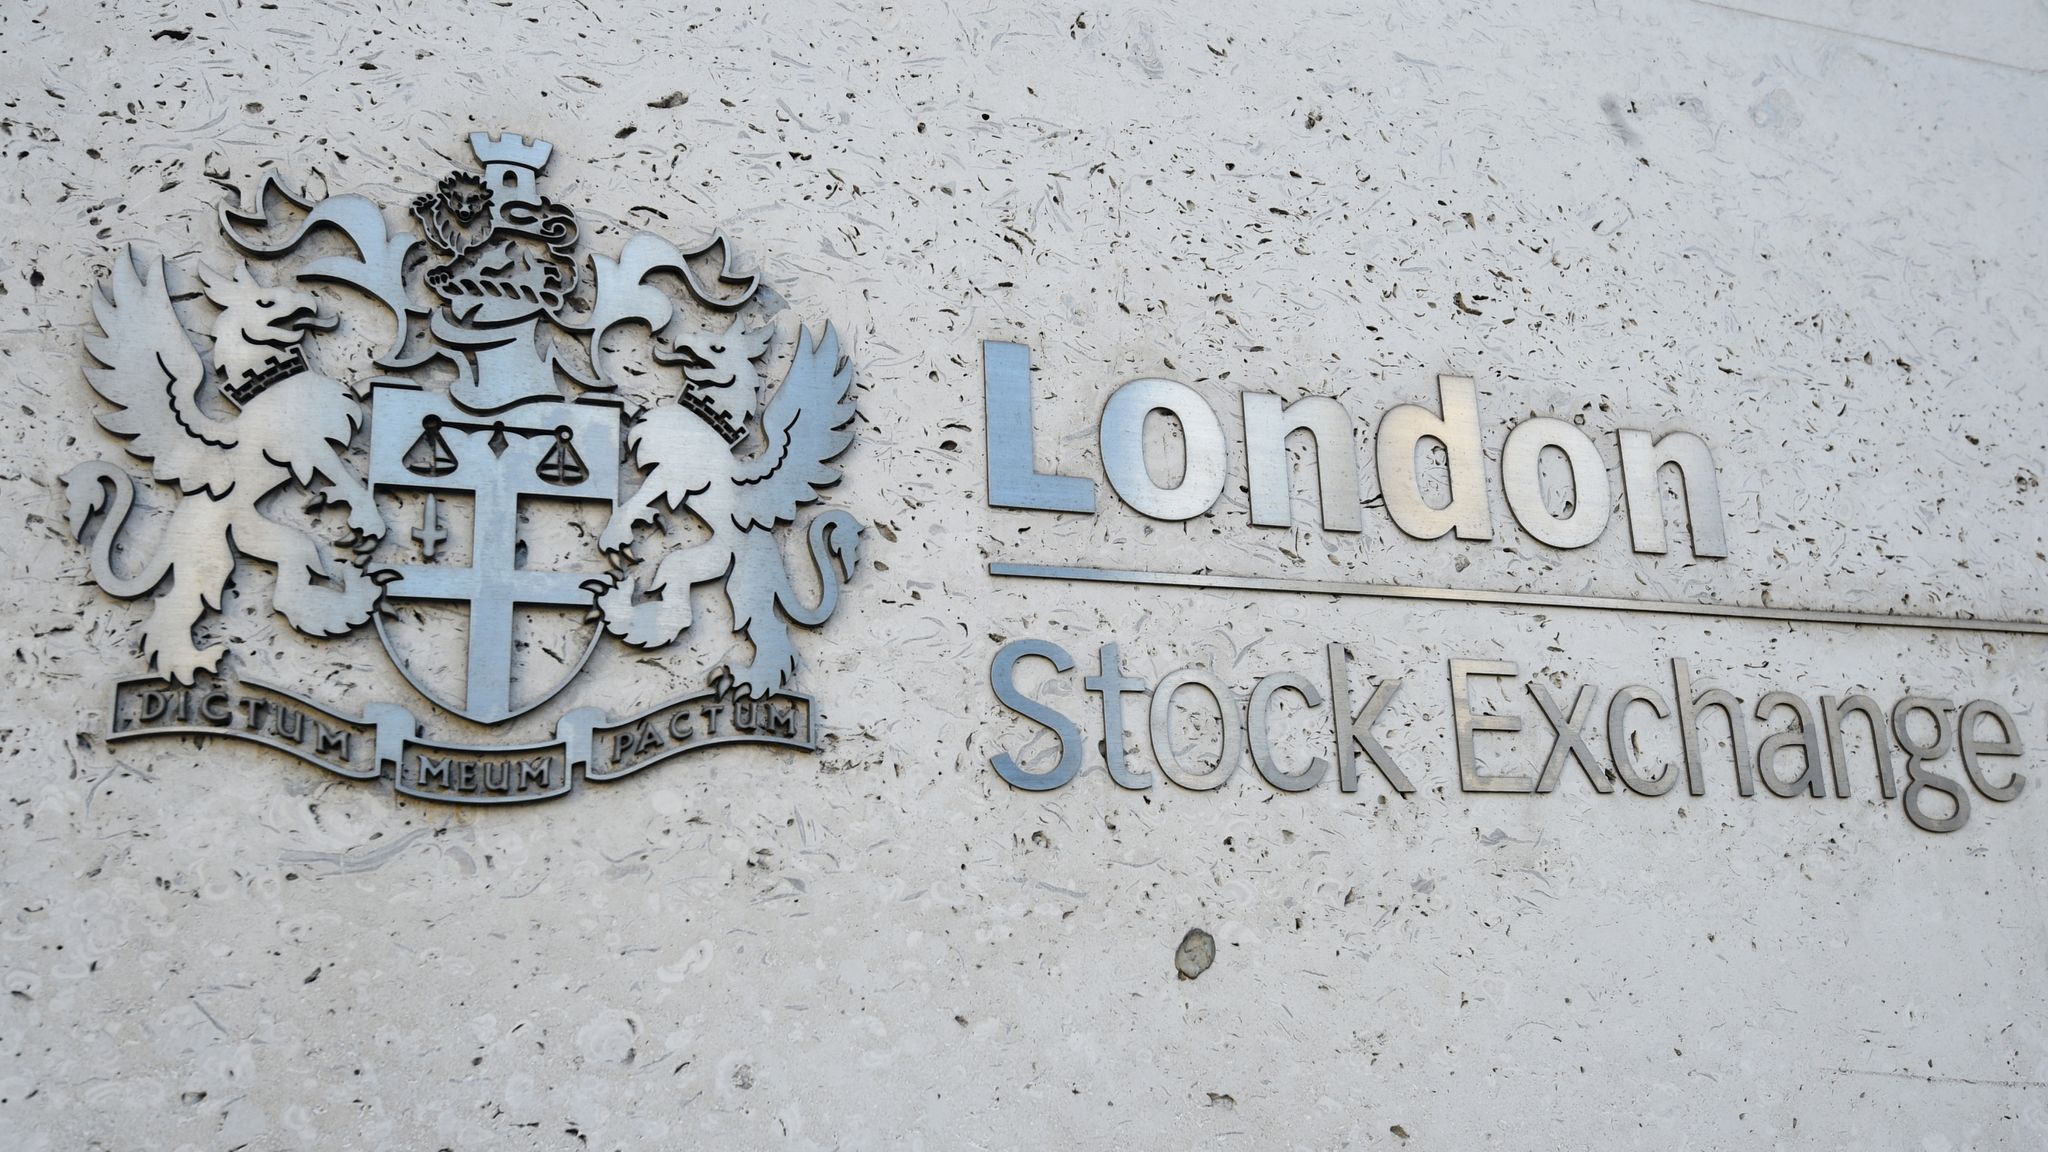 London-listed Russian stocks are collapsing, with trading now suspended